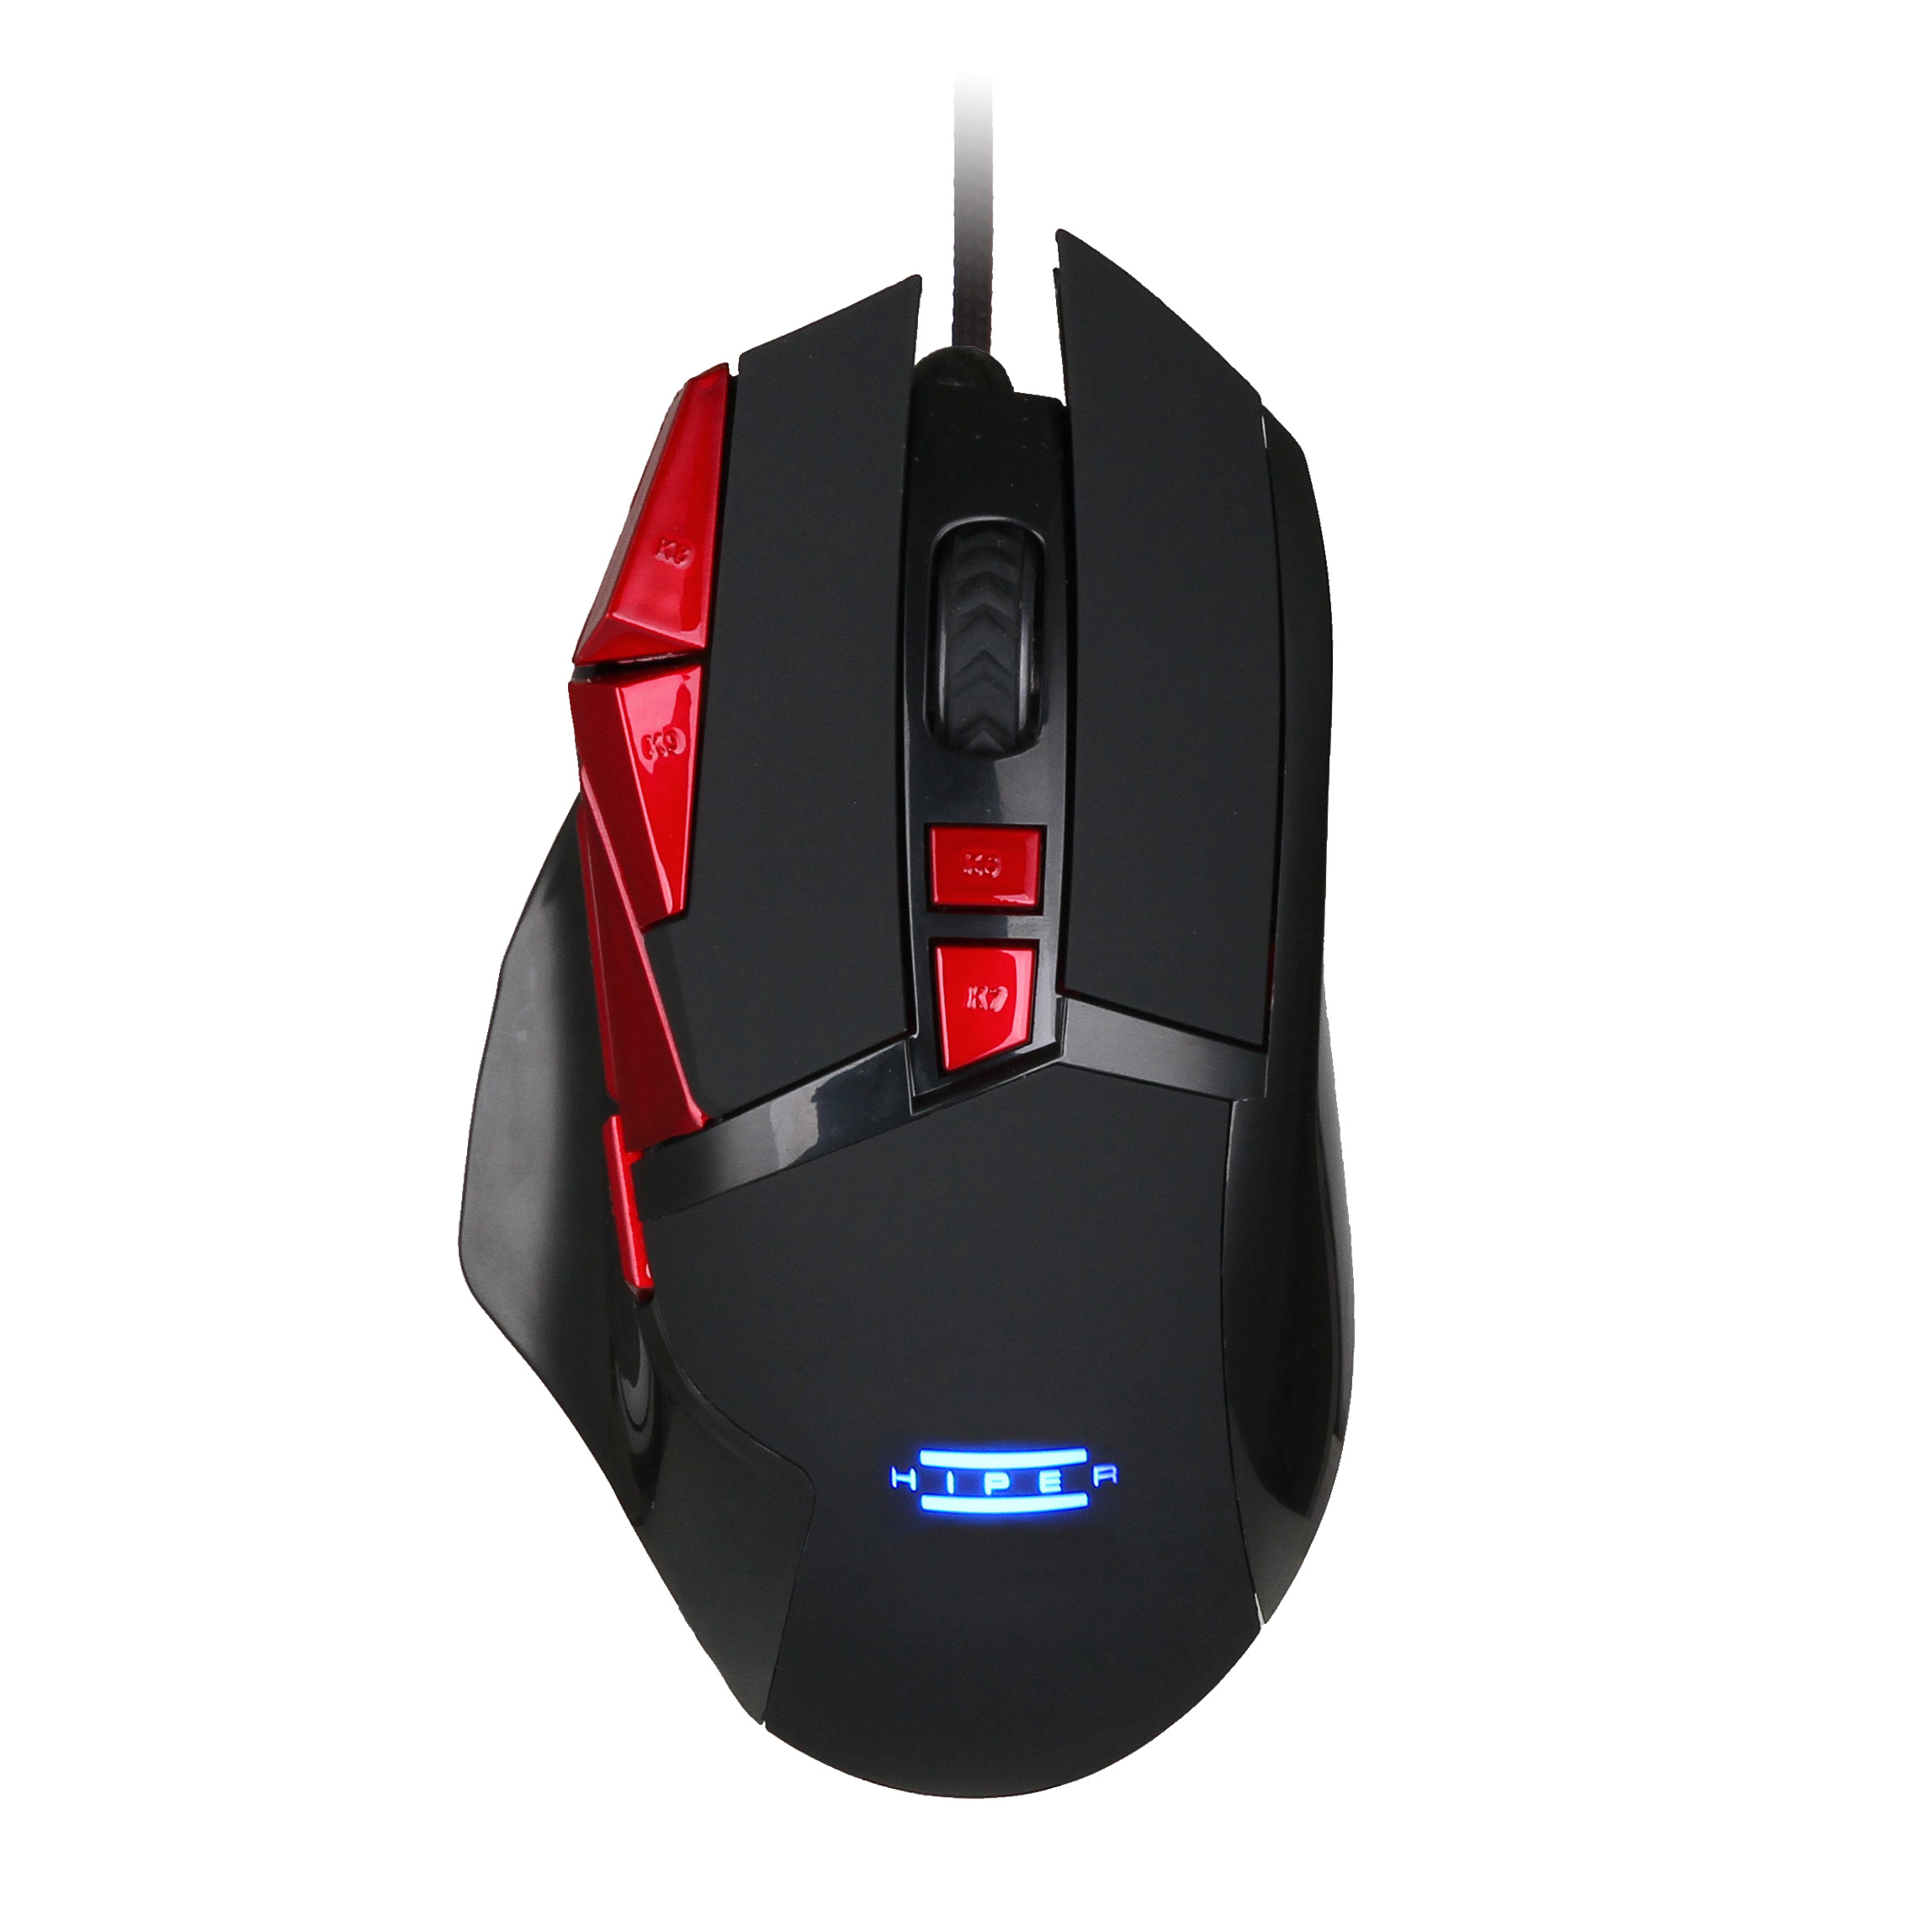 X game мышь. Luxury Gaming Mouse. Hiper Gaming Mouse спайка провода.